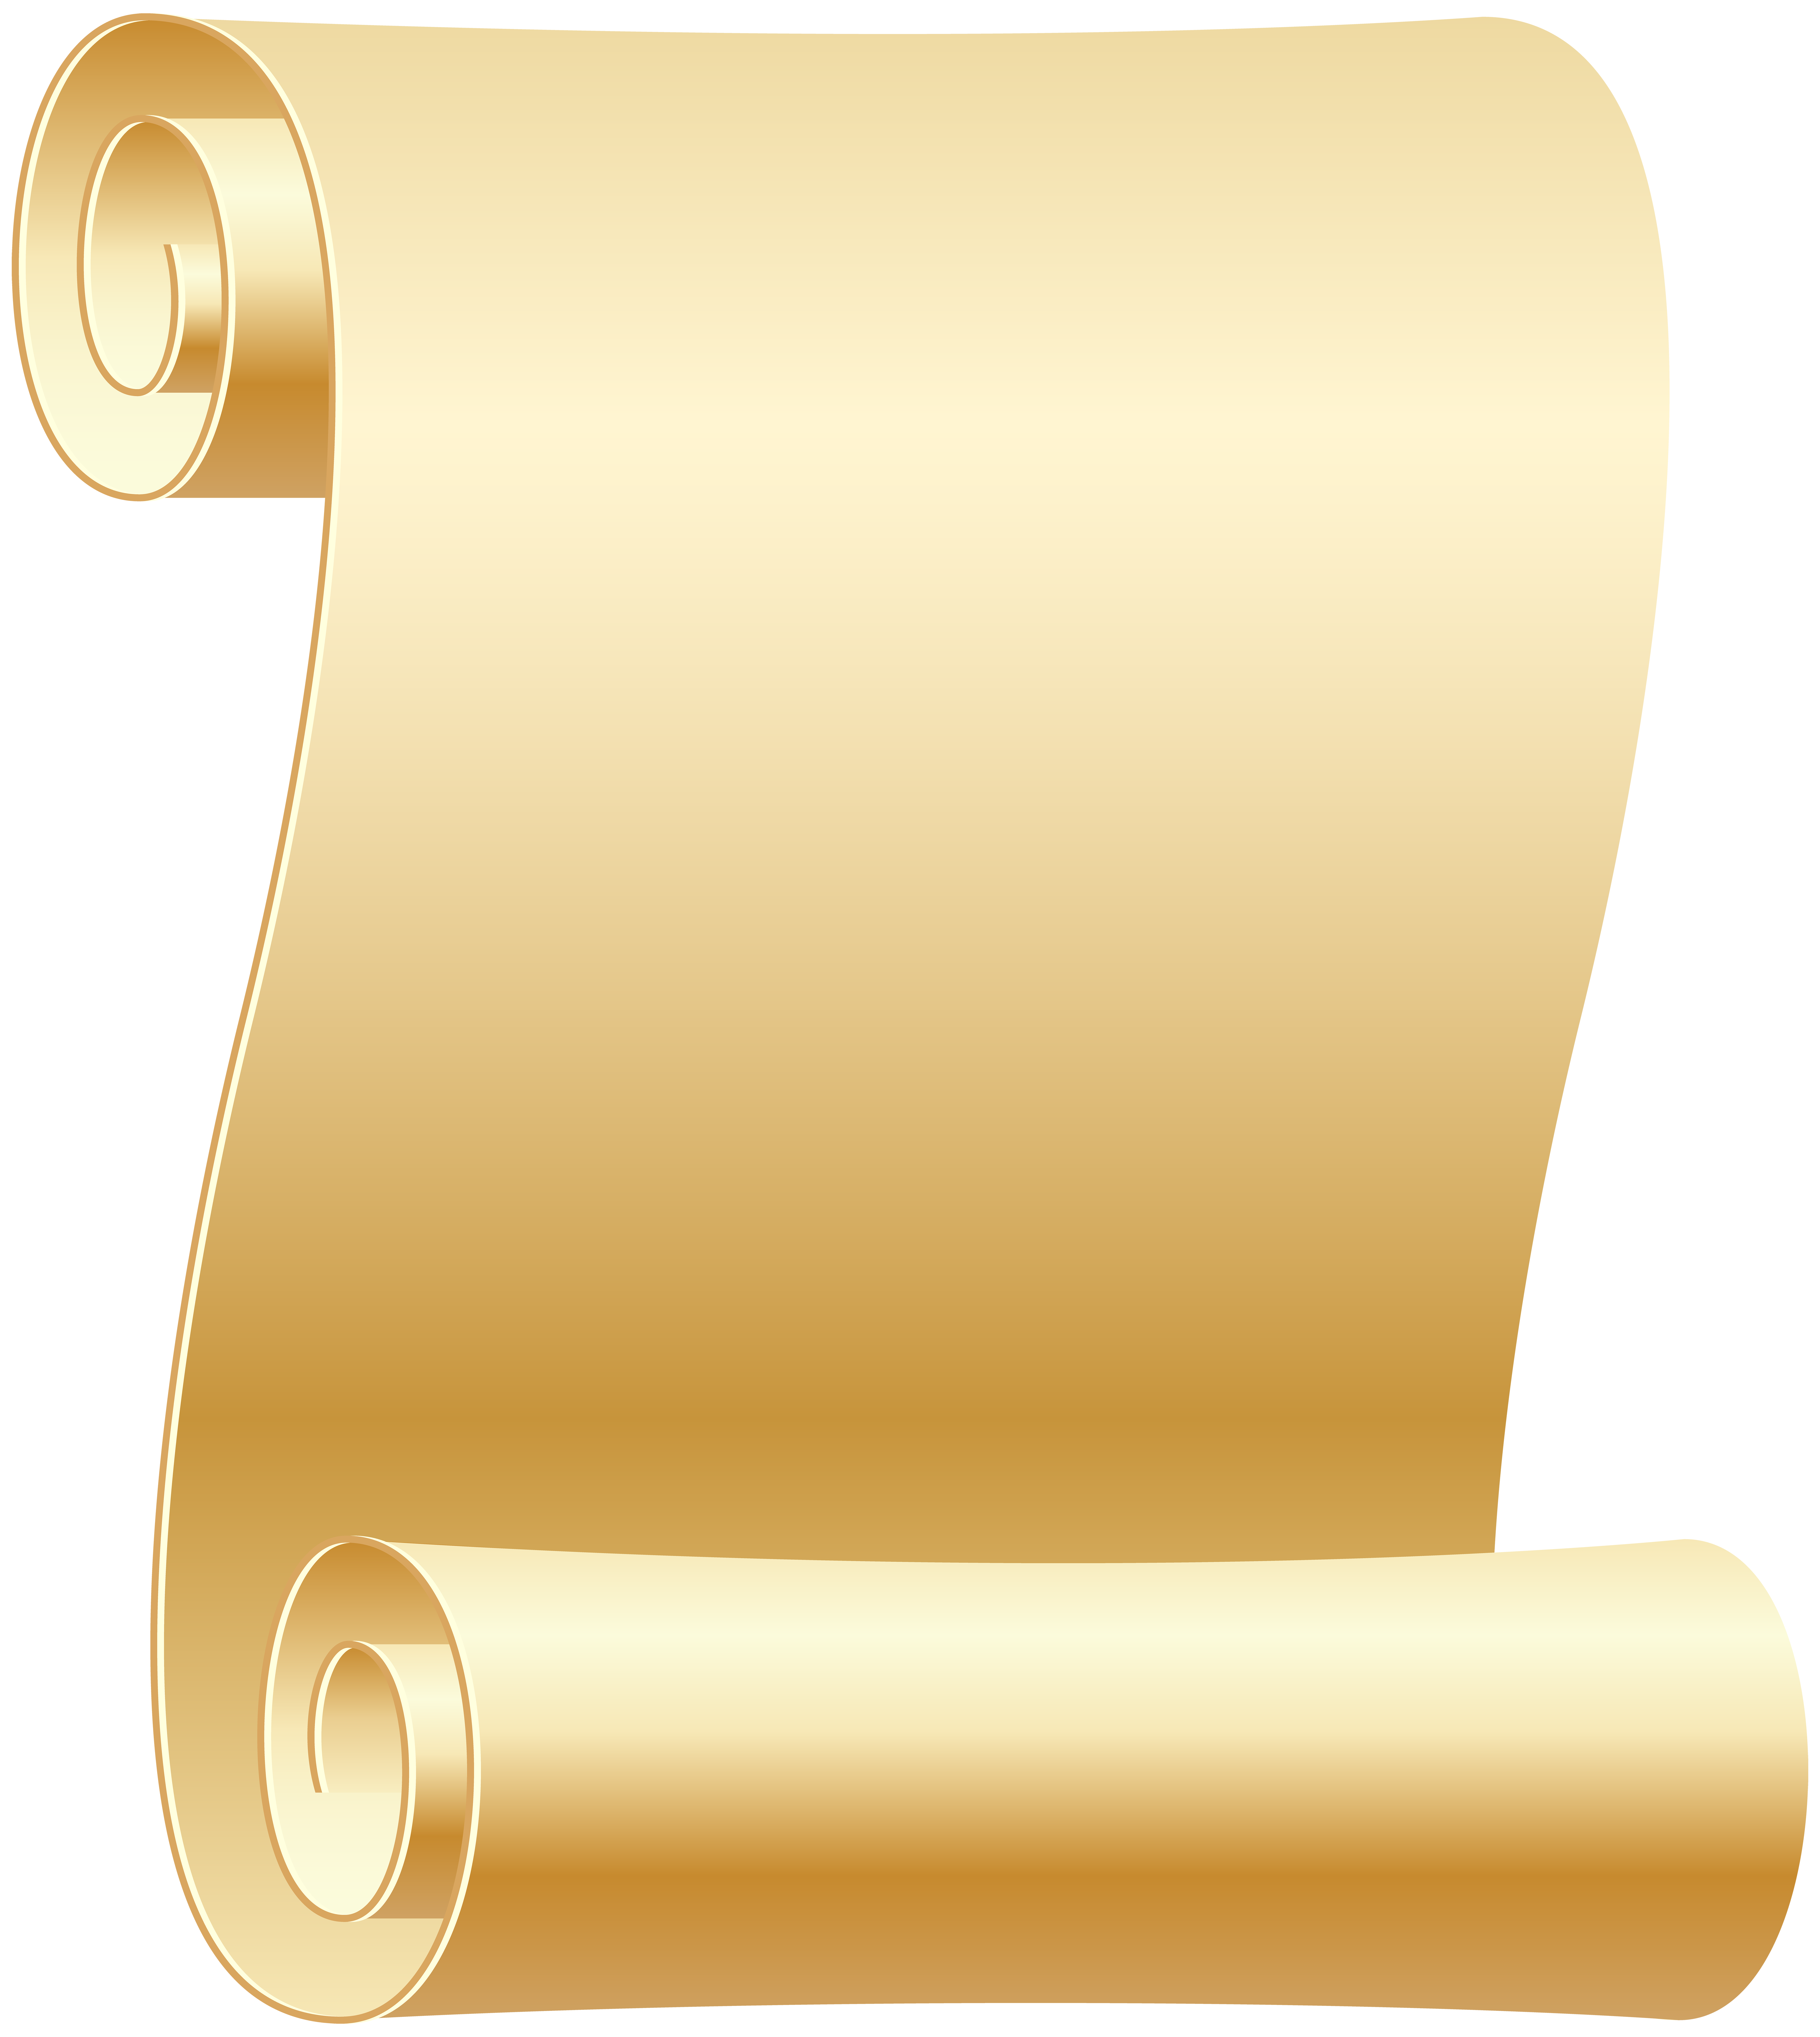 Laws clipart old document. Empty scroll transparent png